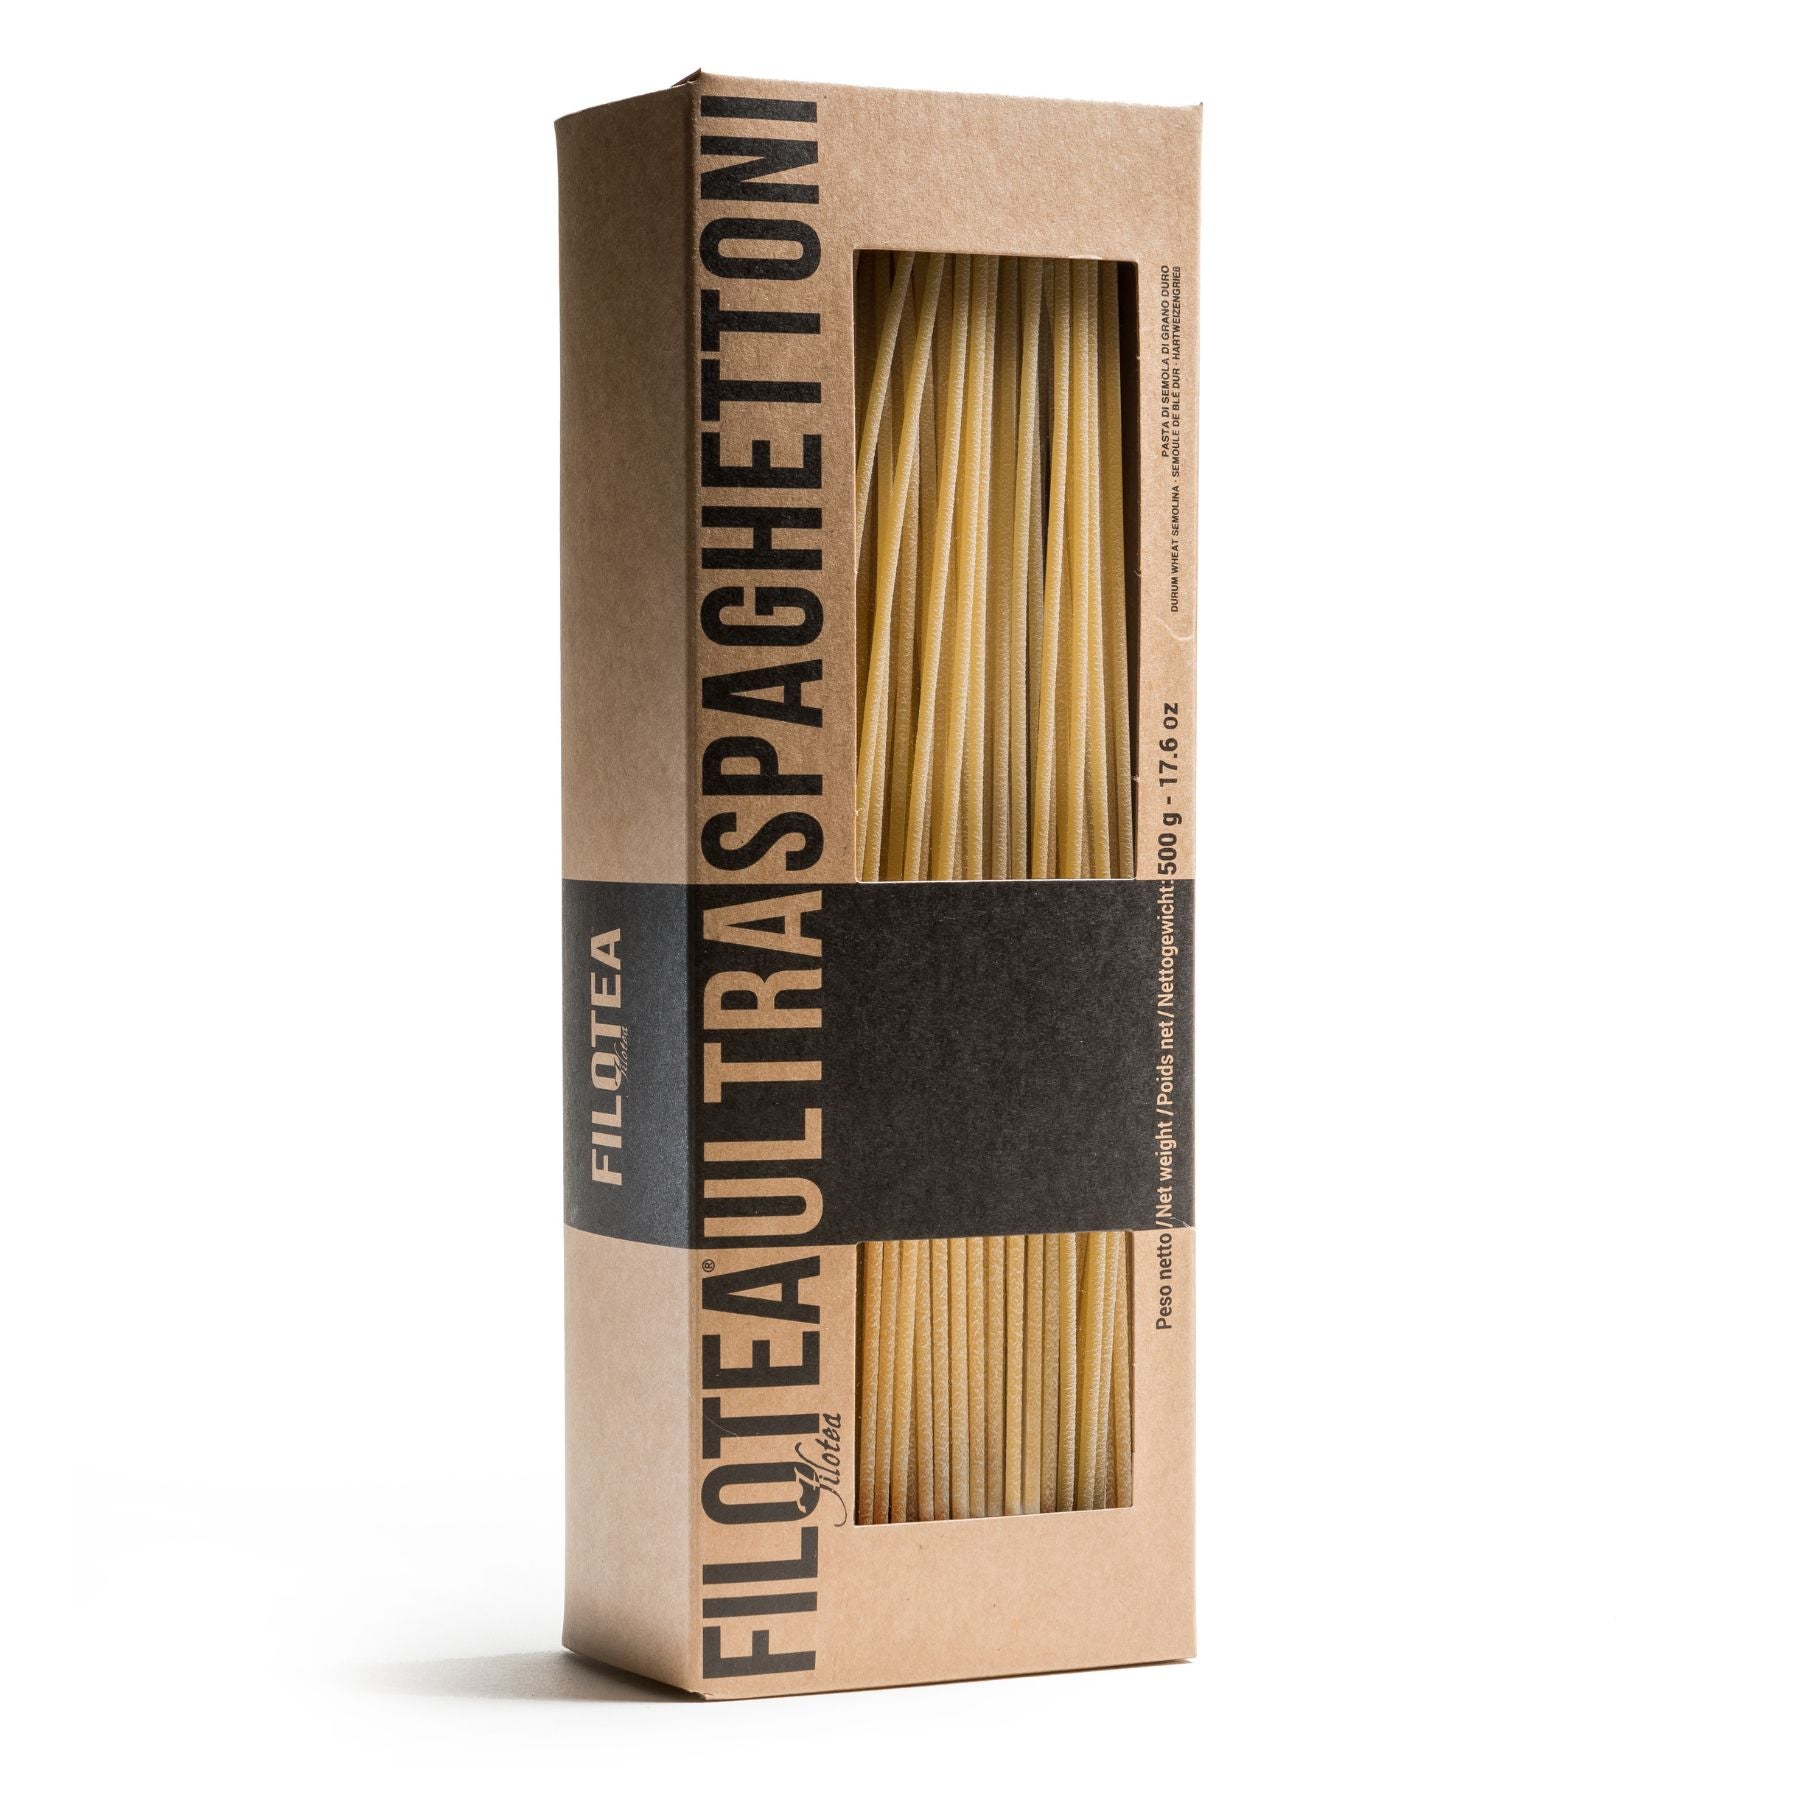 Filotea Ultra Spaghettoni Durum Wheat Semolina Pasta 500g | Imported and distributed in the UK by Just Gourmet Foods